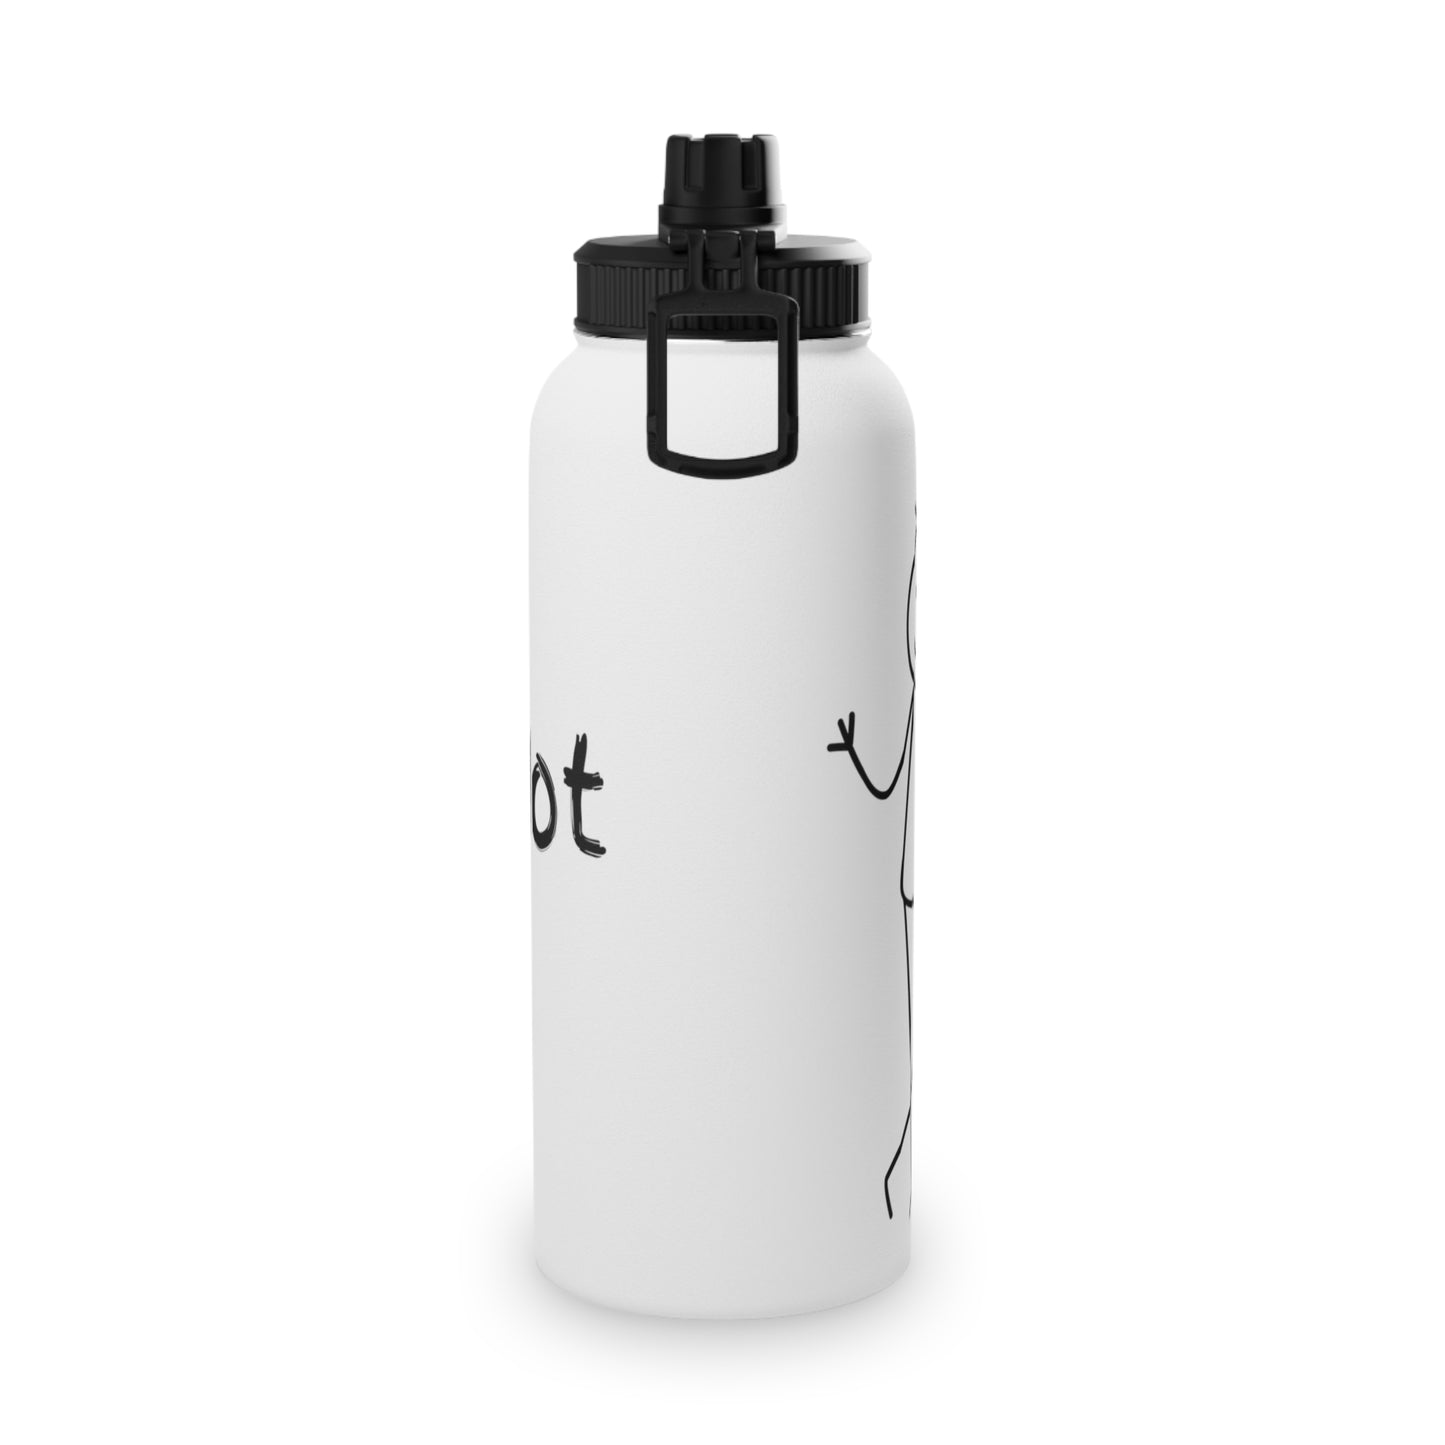 Shall Not - Stainless Steel Water Bottle, Sports Lid